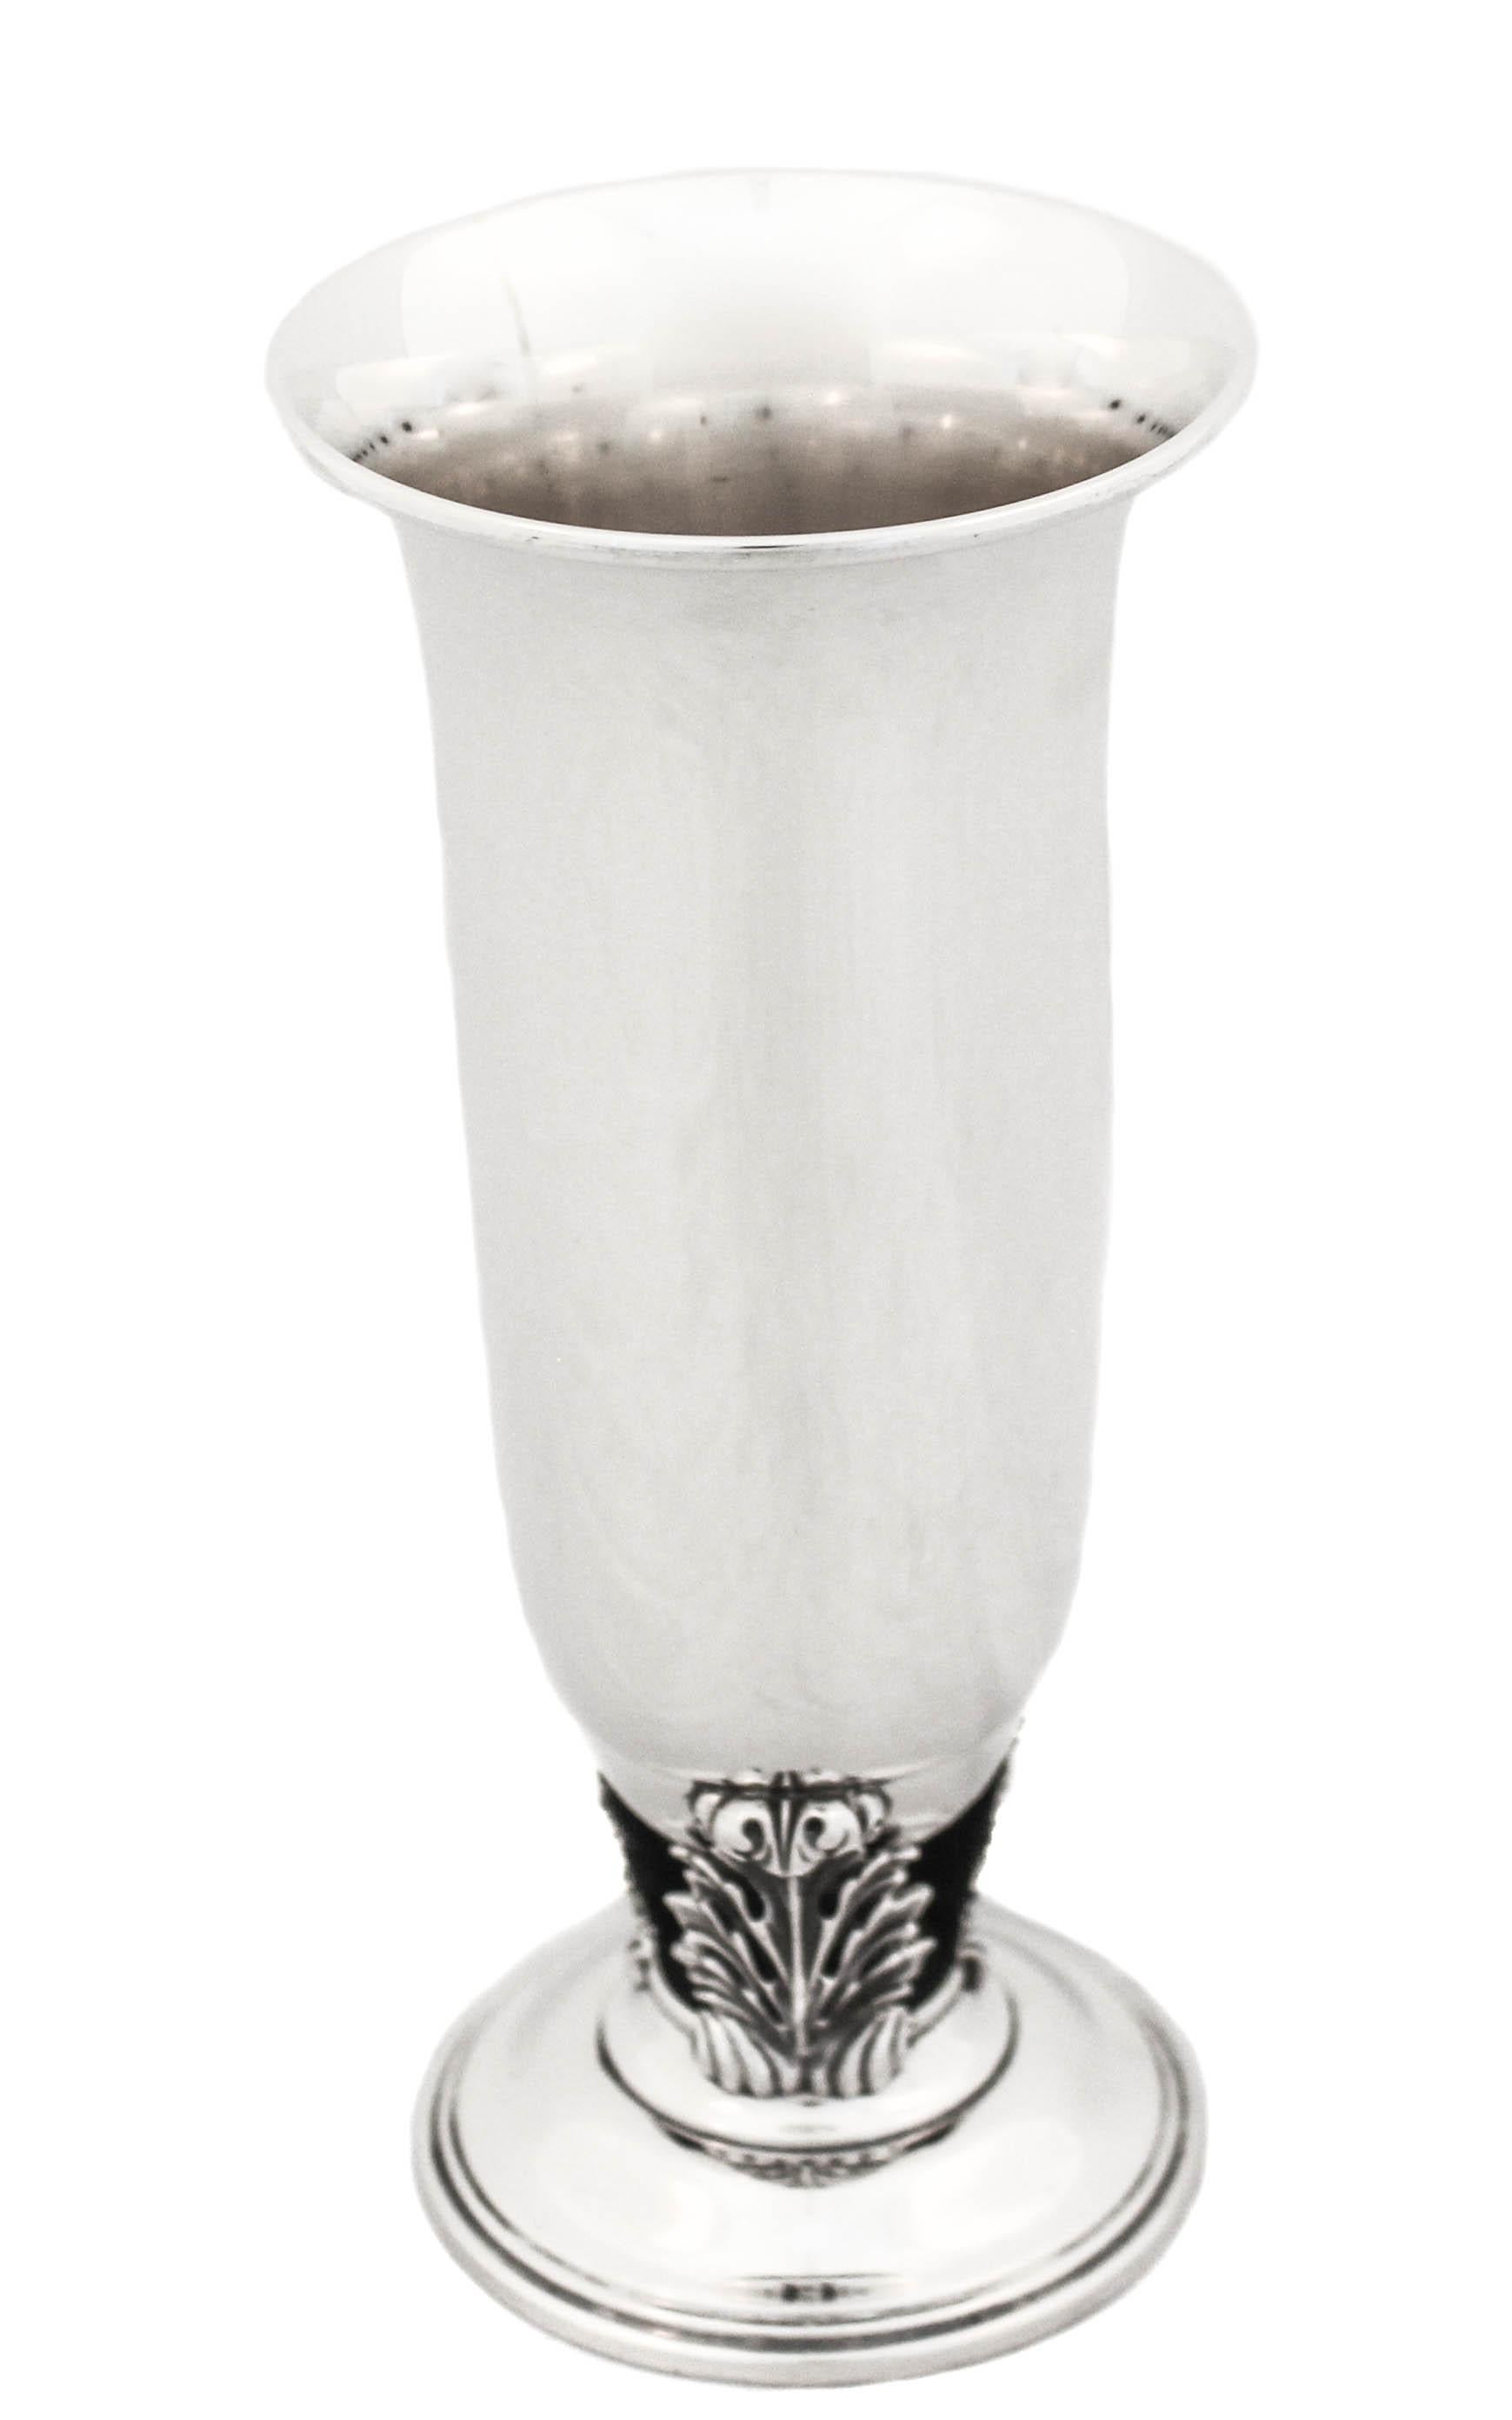 Being offered is a sterling silver vase by the Quaker Silver Company. It has a Mid-Century modern style; sleek with three leaves connecting the vase to the base (base is not weighted). The rim opens outwards allowing the flowers to spread and